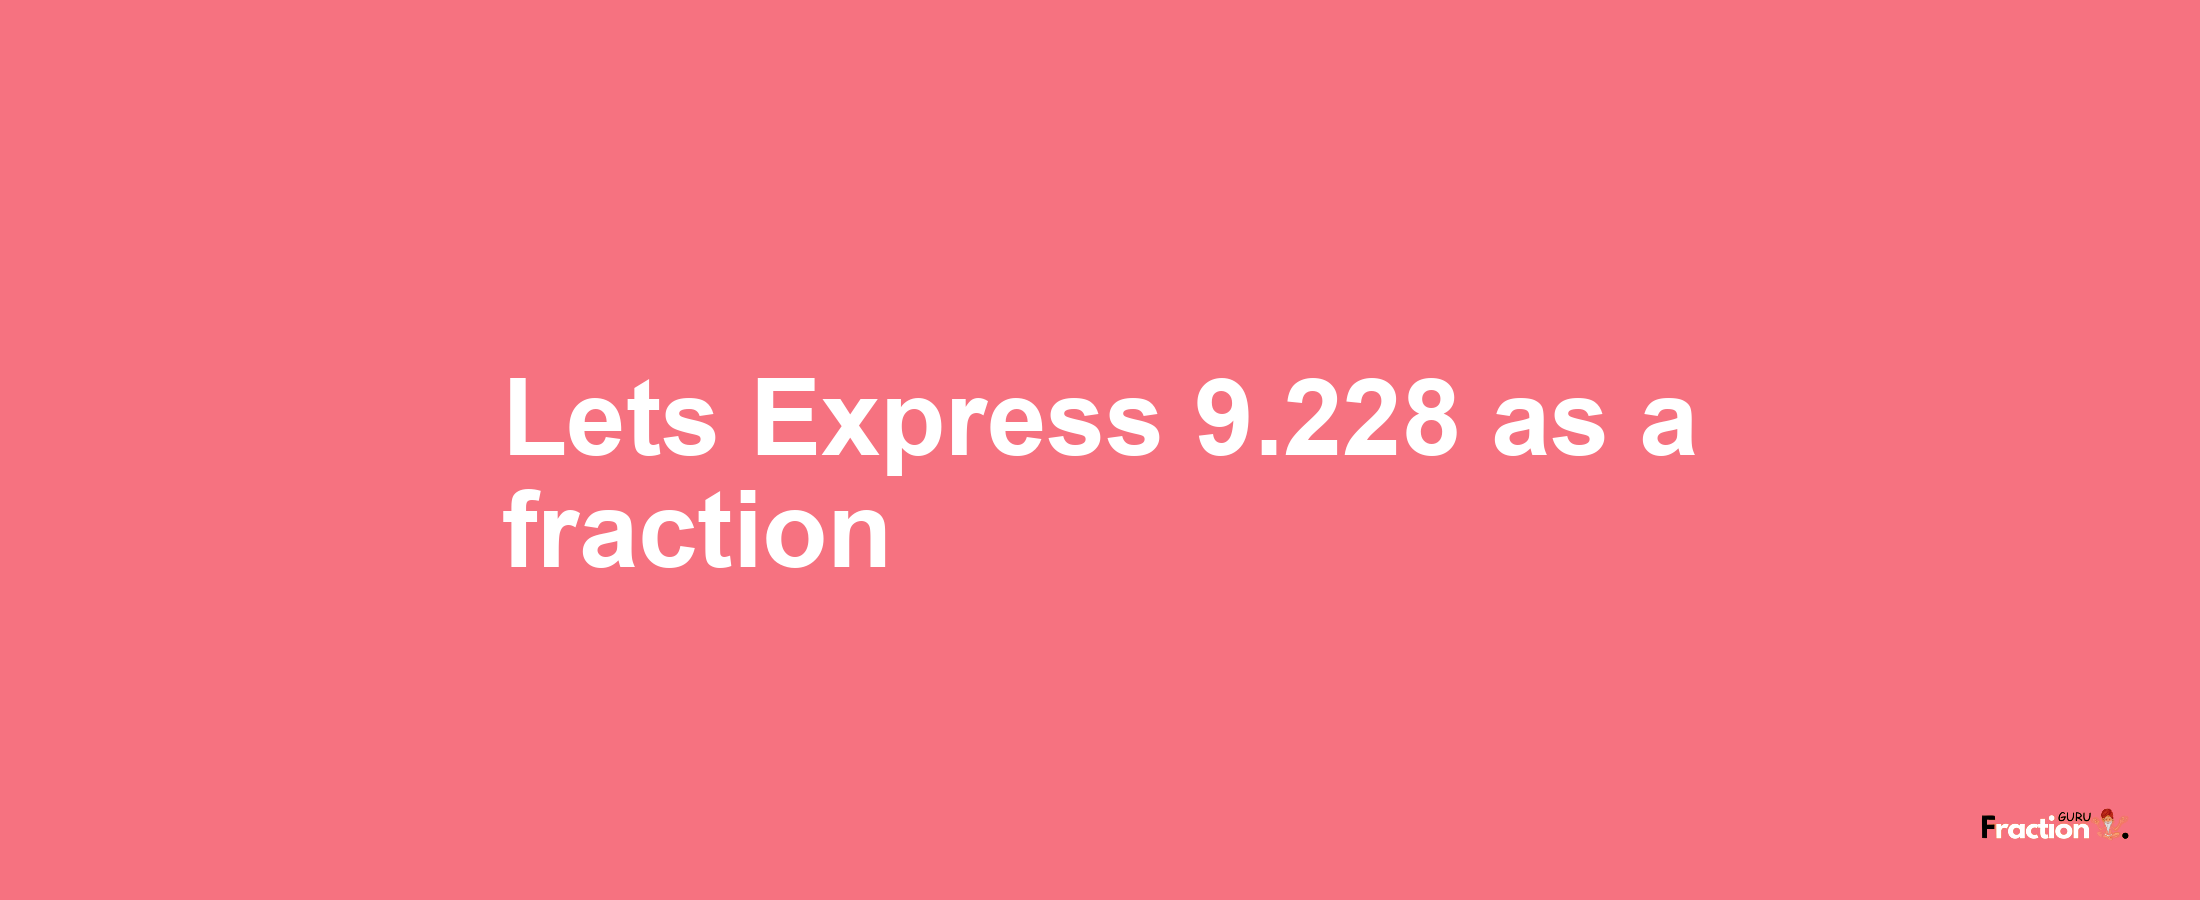 Lets Express 9.228 as afraction